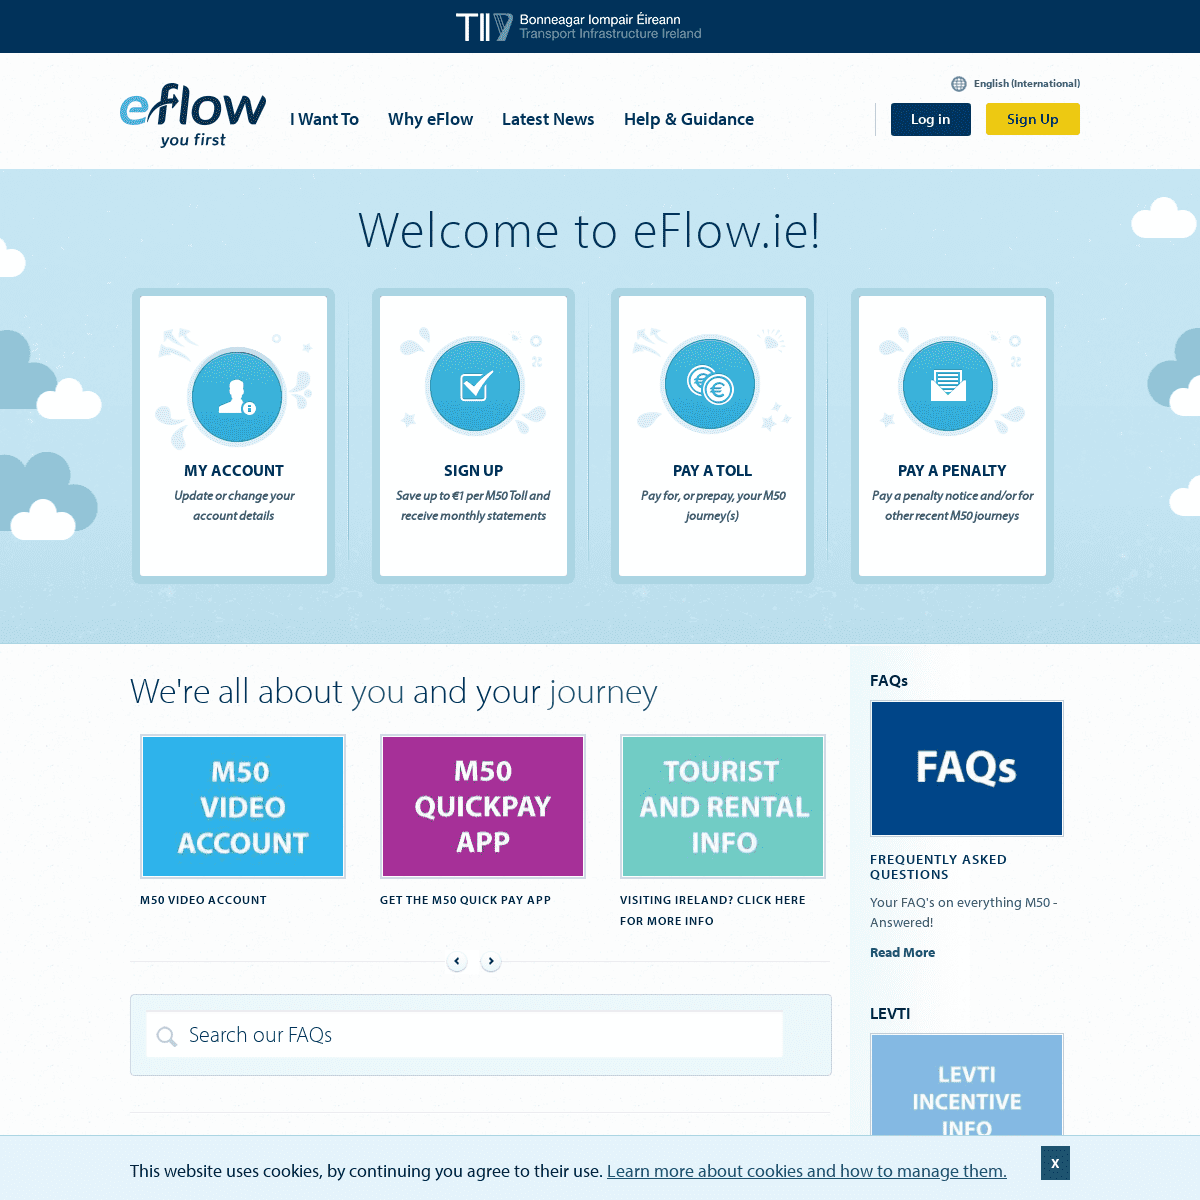 A complete backup of https://eflow.ie